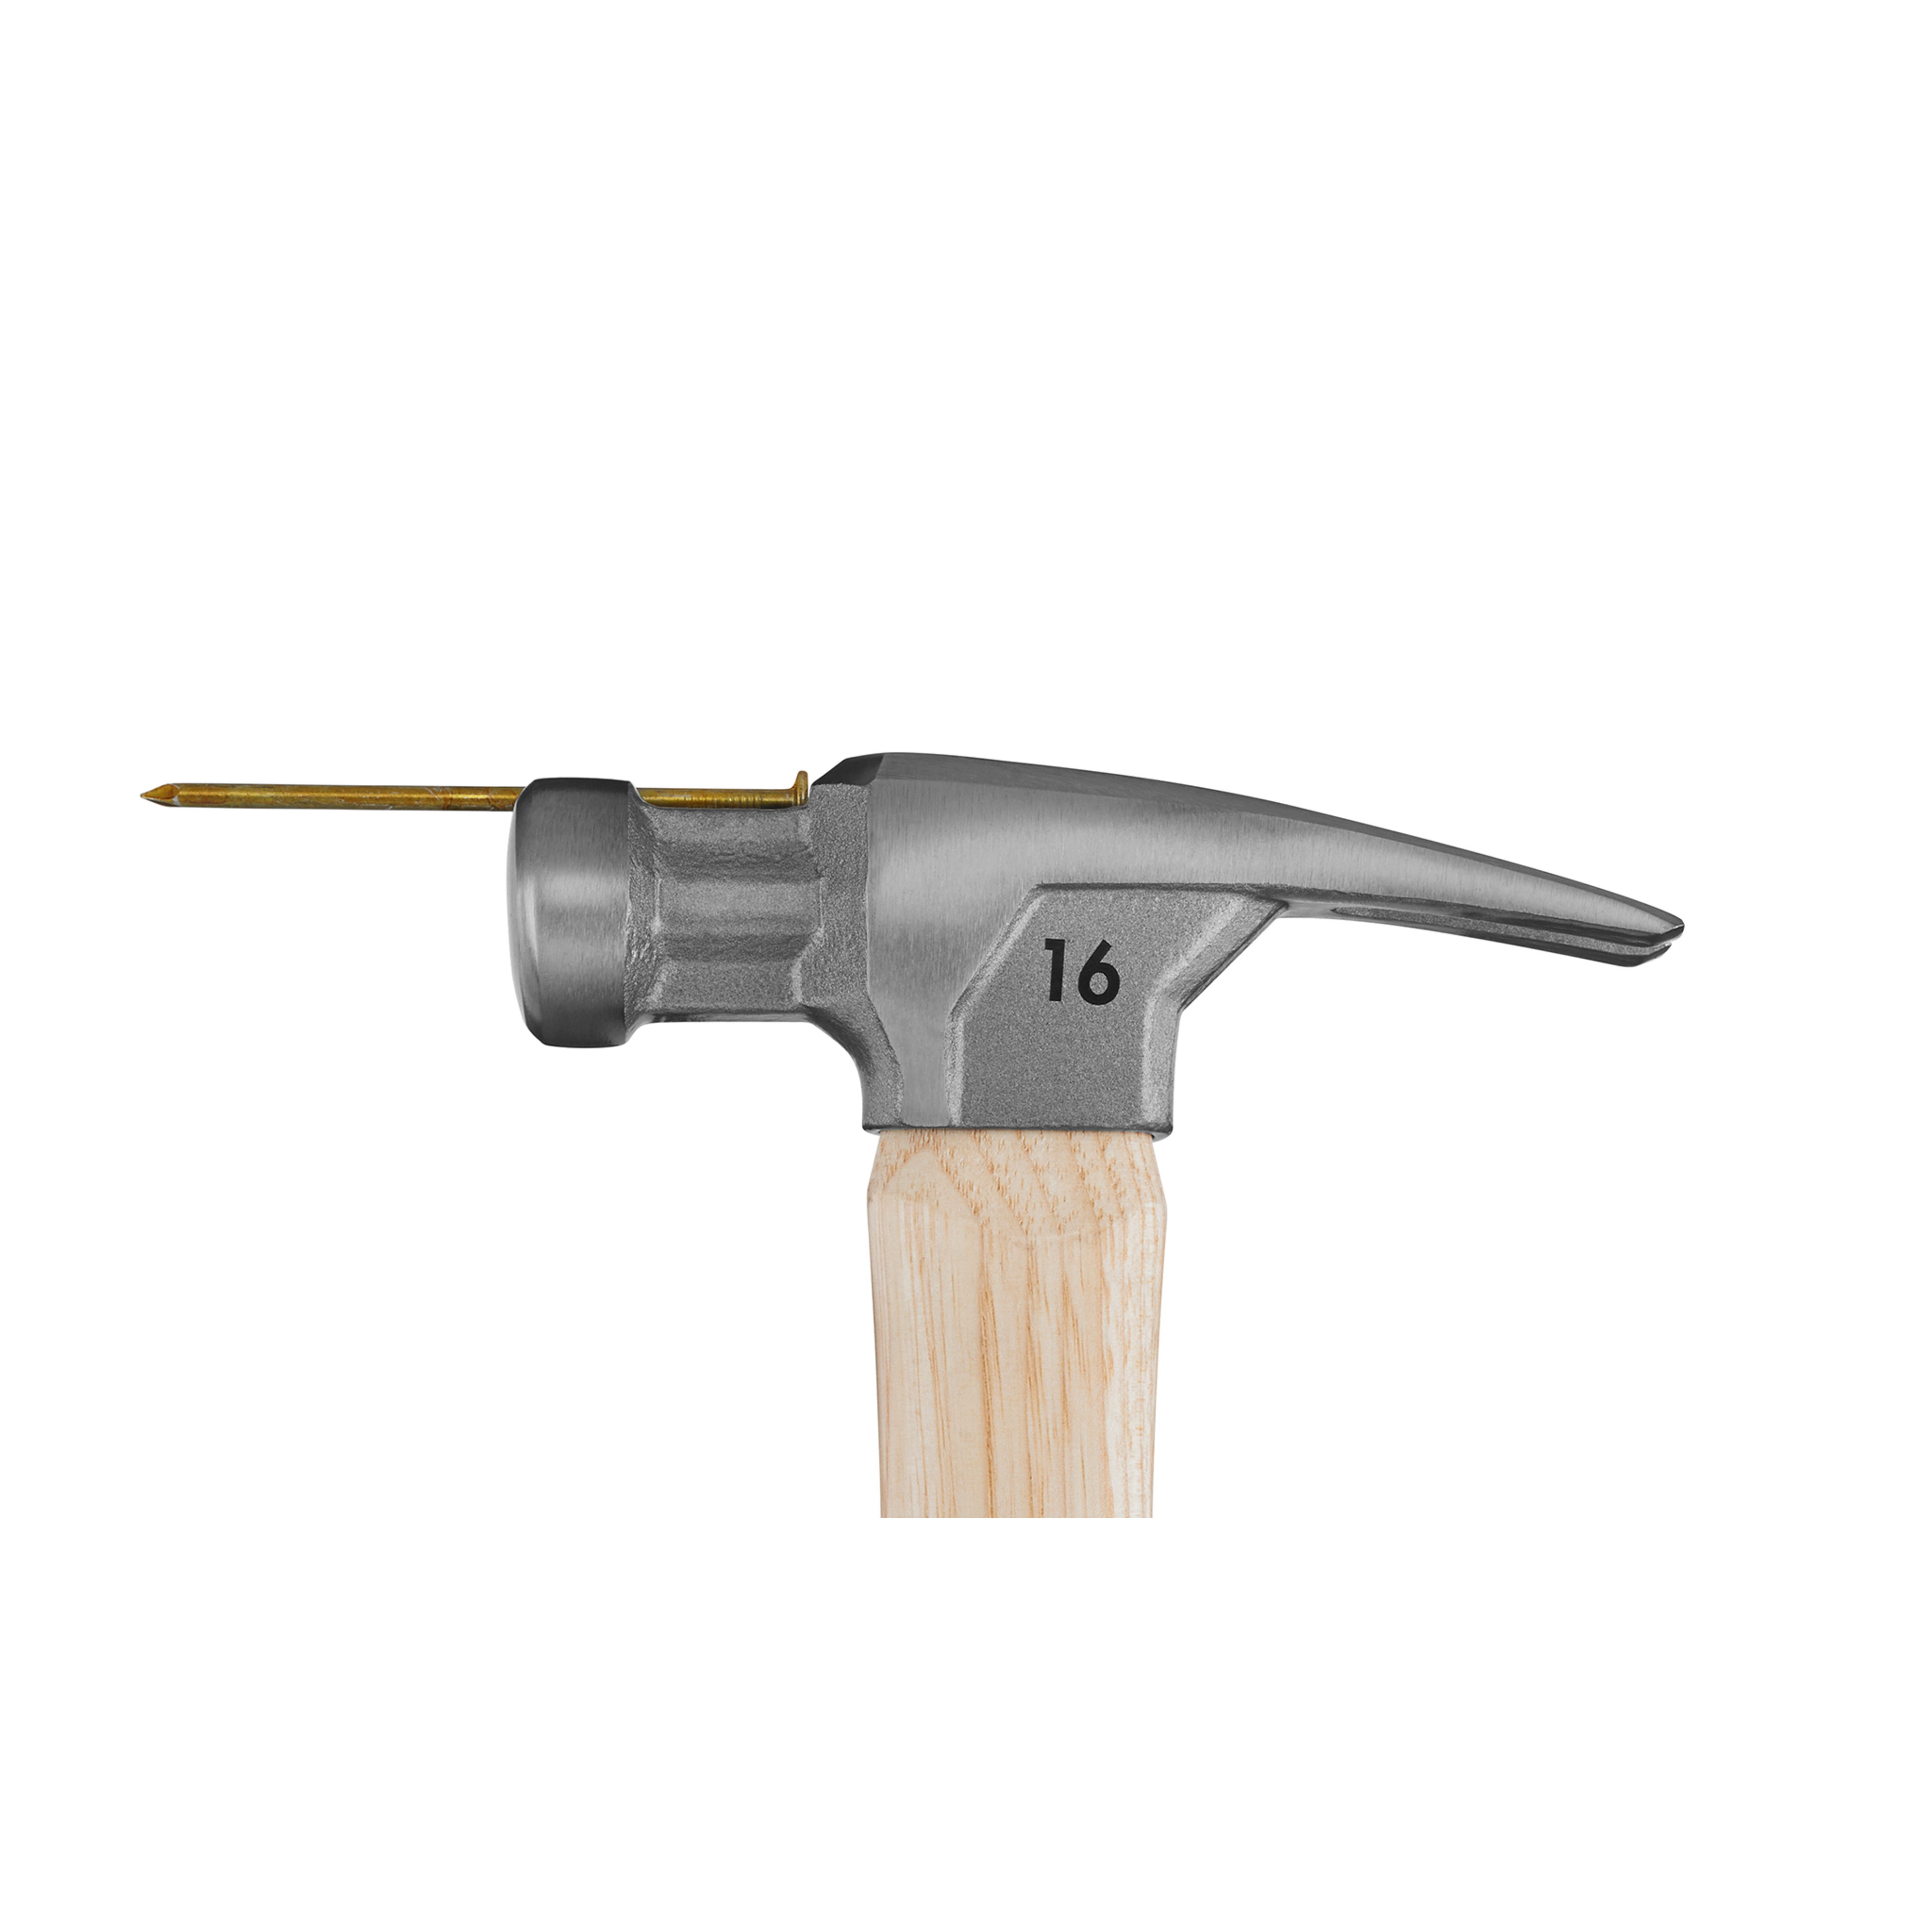 HART 16oz Wood Handle Hammer, Rip Claw, Magnetic Nail Starter - image 3 of 7